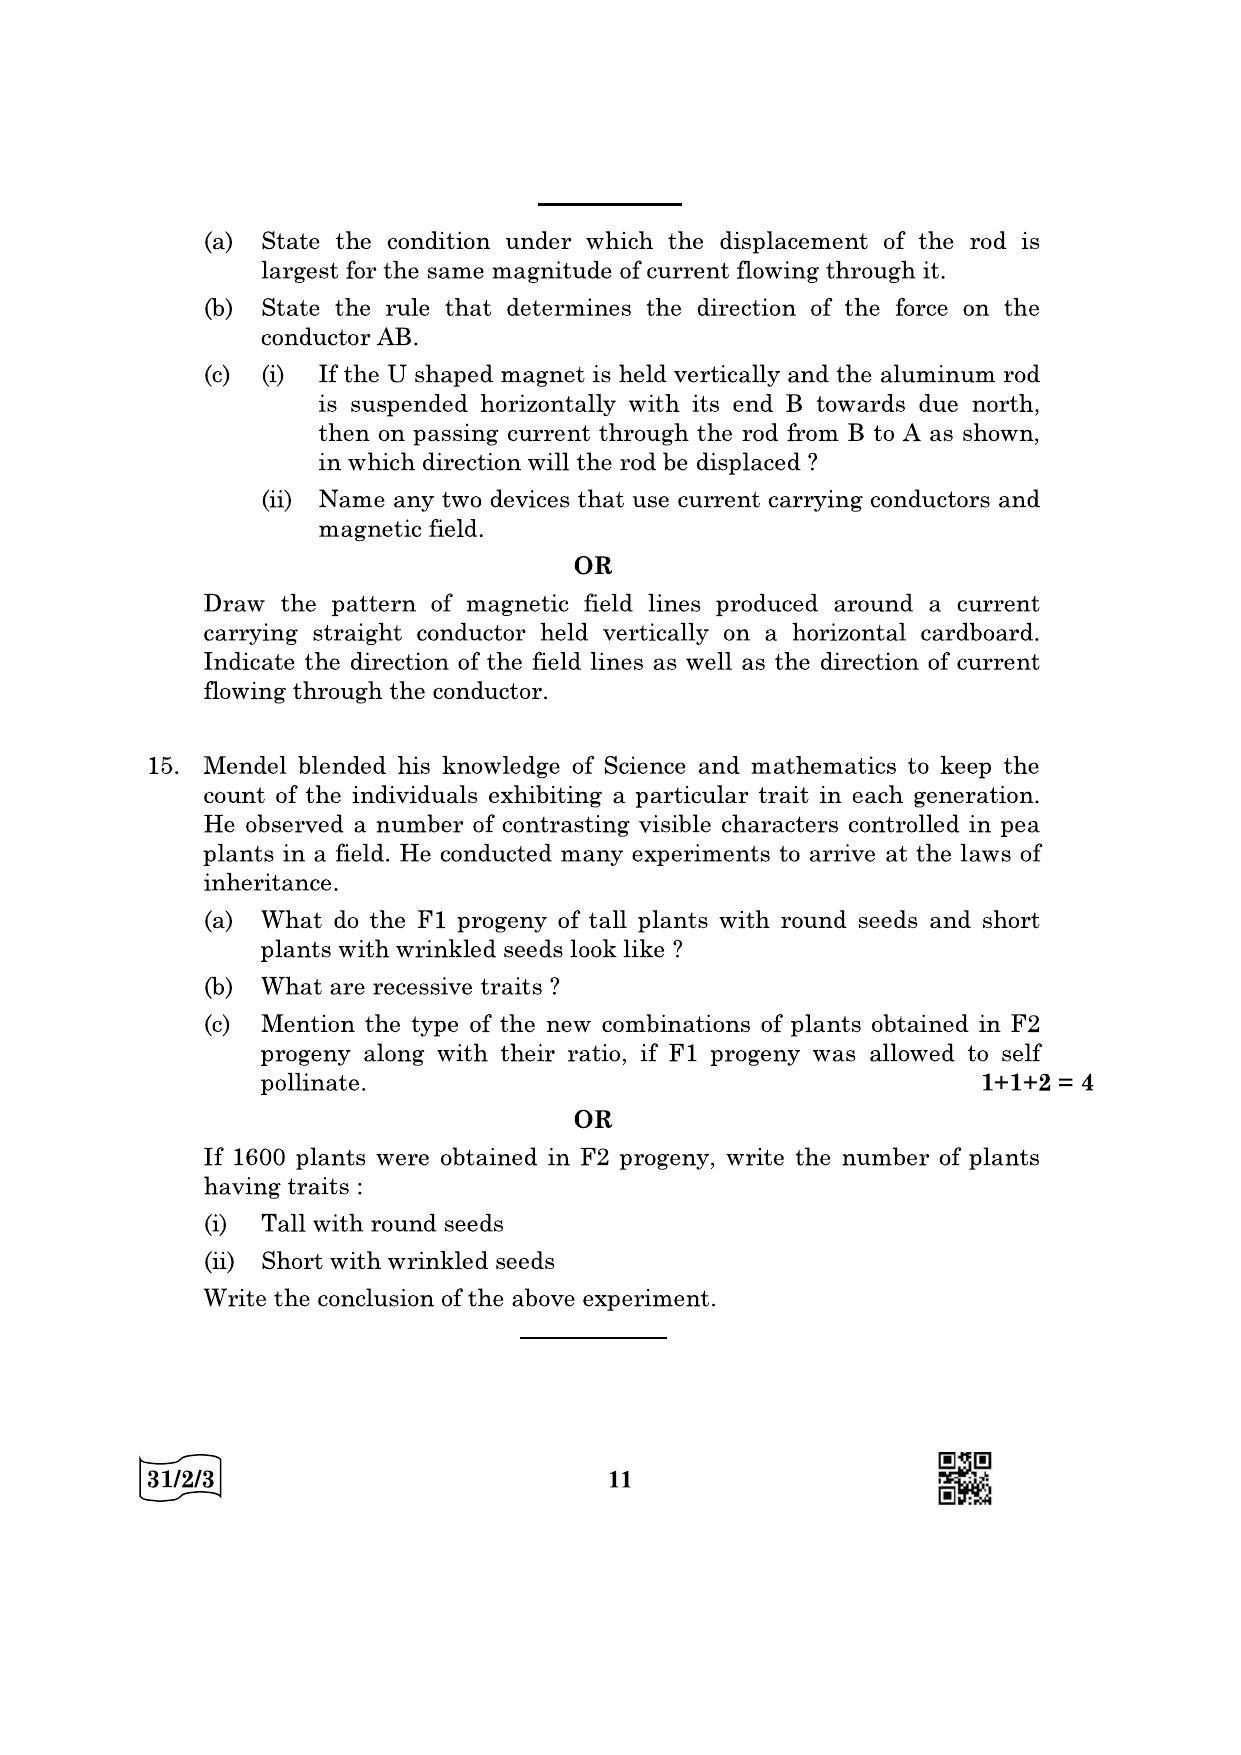 CBSE Class 10 31-2-3 Science 2022 Question Paper - Page 11